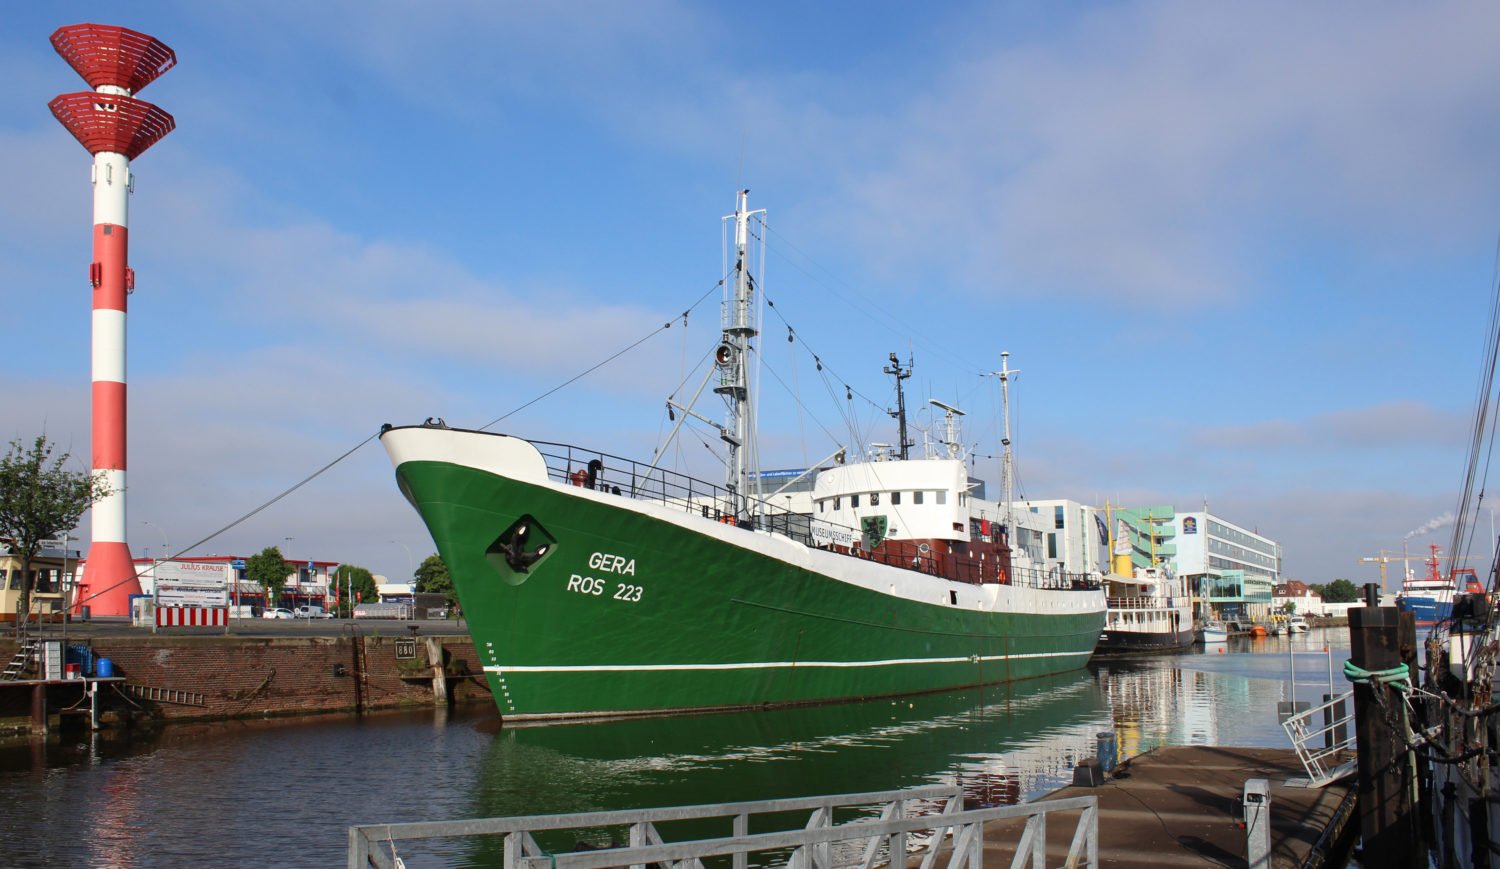 The museum ship GERA is the only floating deep-sea fishing museum in the whole of Germany